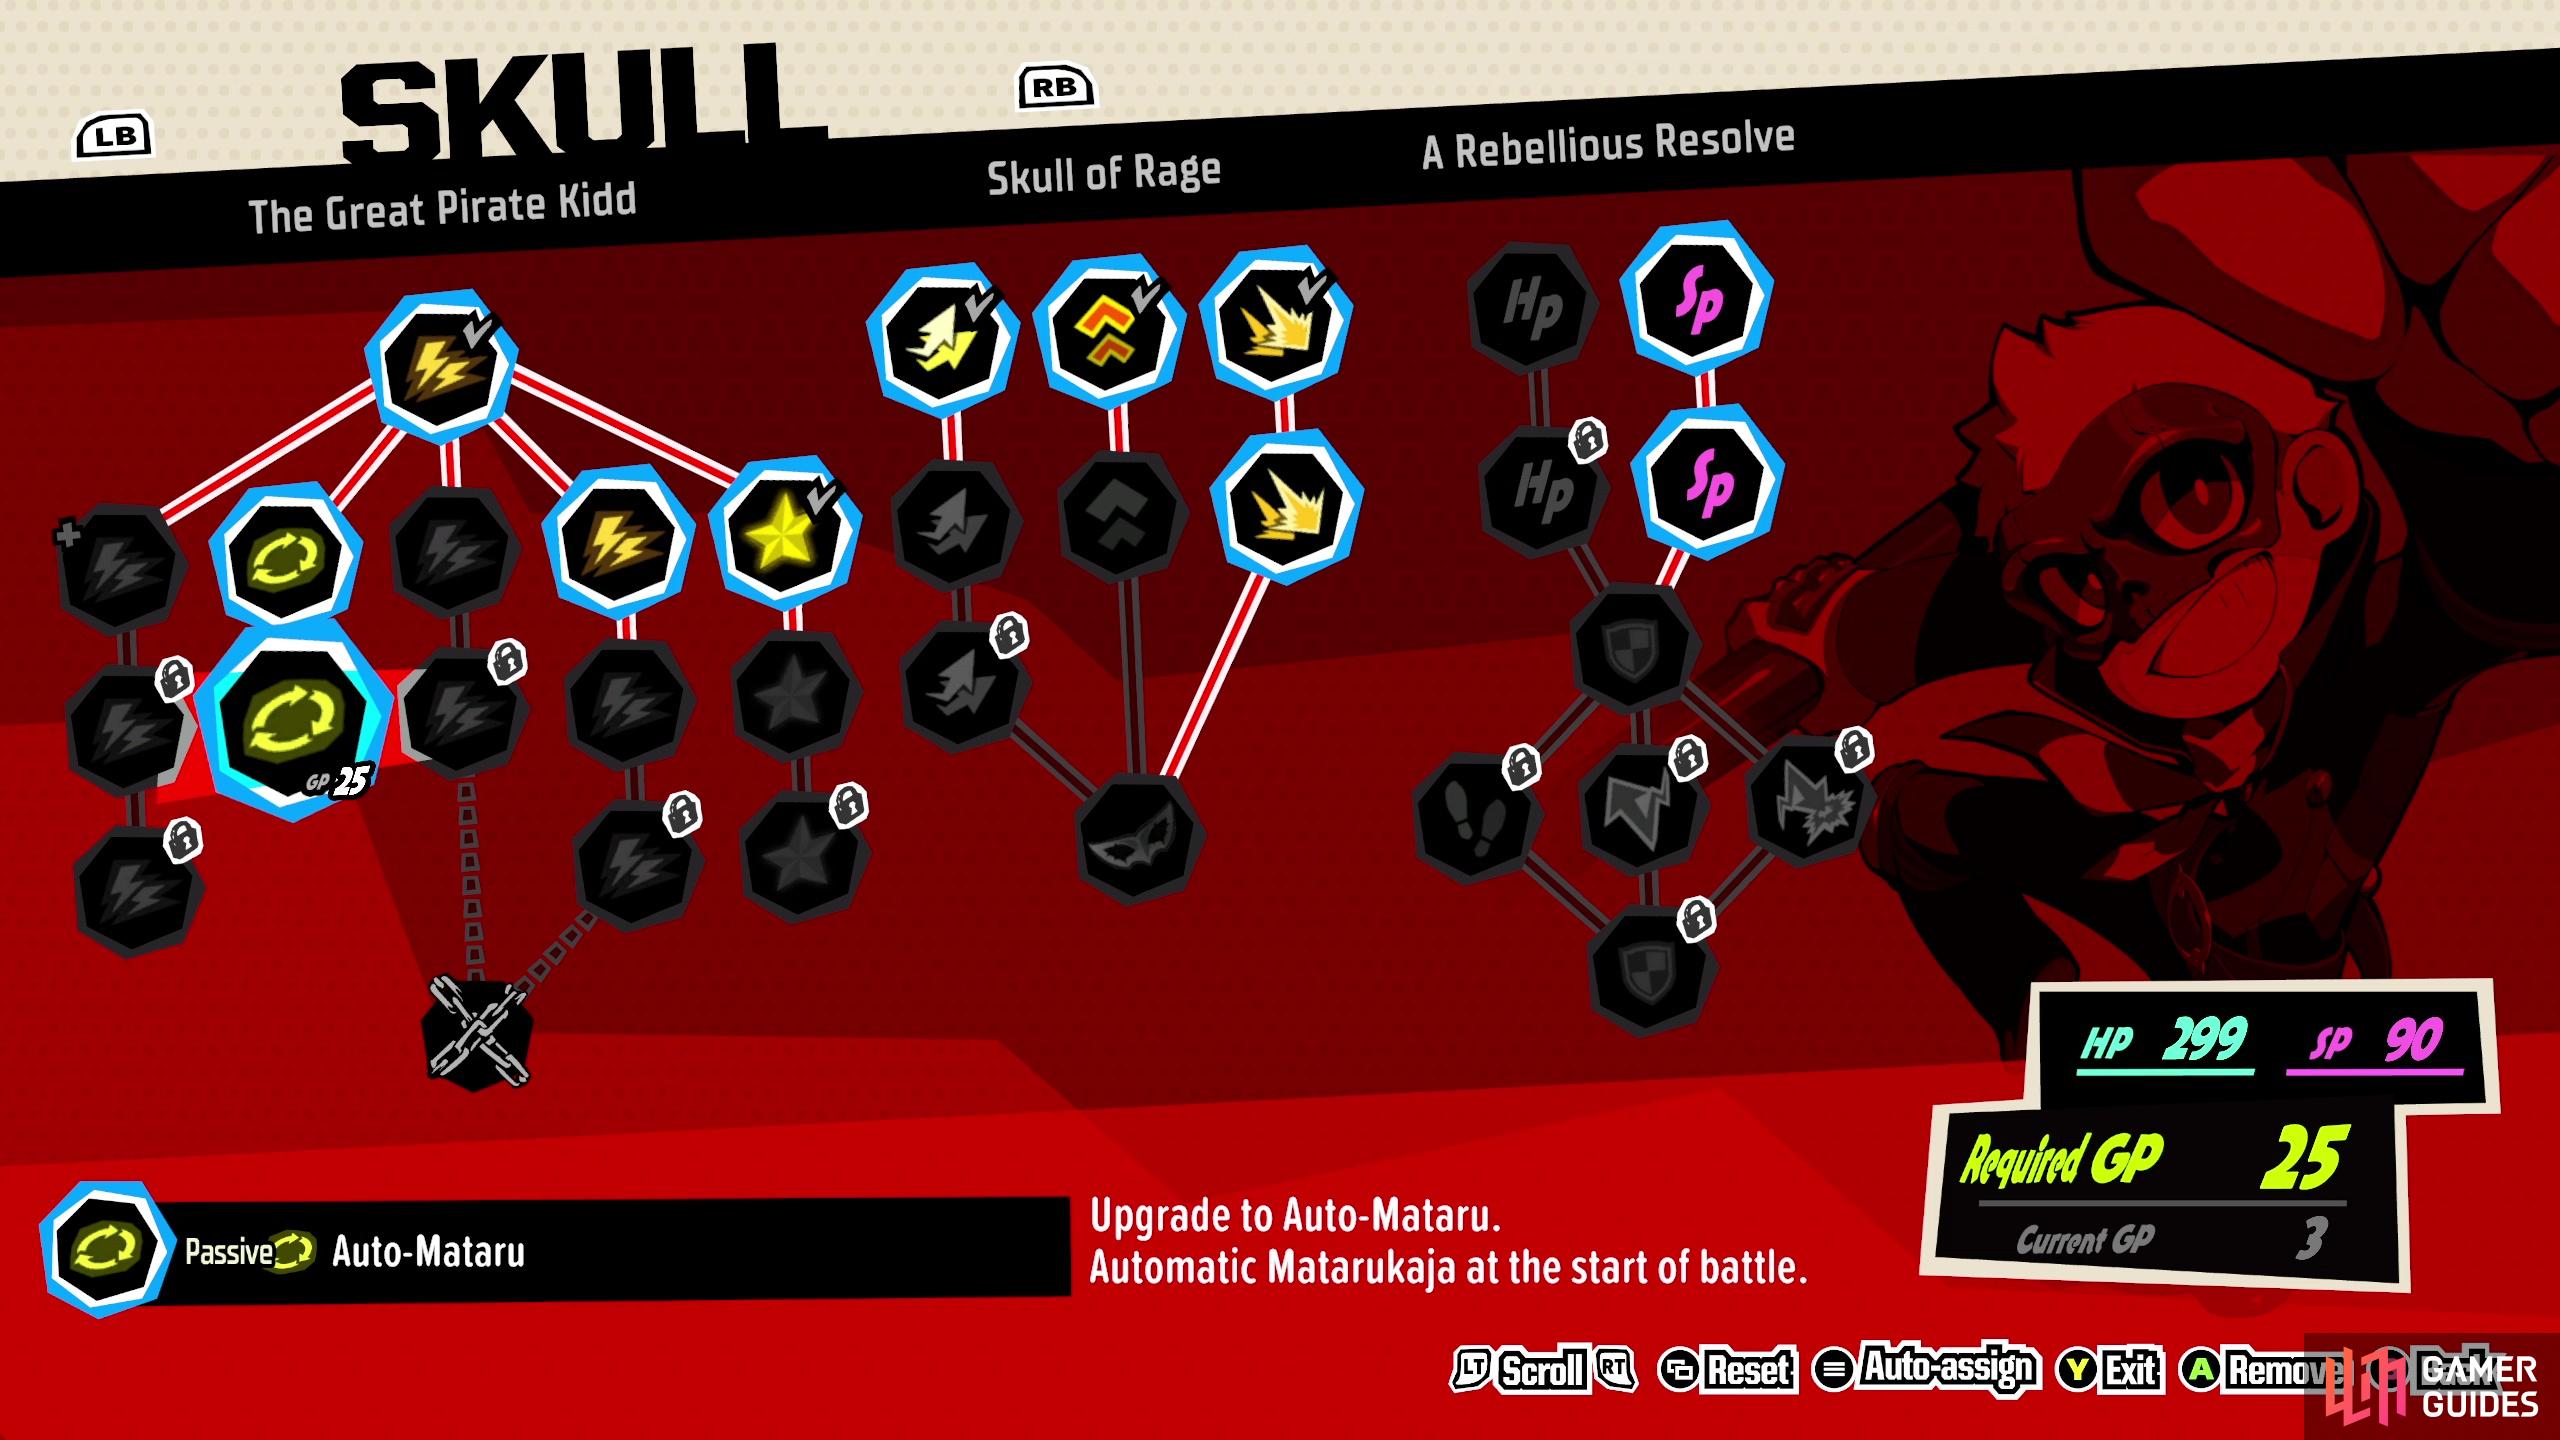 Ryuji's Auto-Mataru skill gives us enough oomph to clear the quest in a single Triple Threat, which makes him a fine third party member.